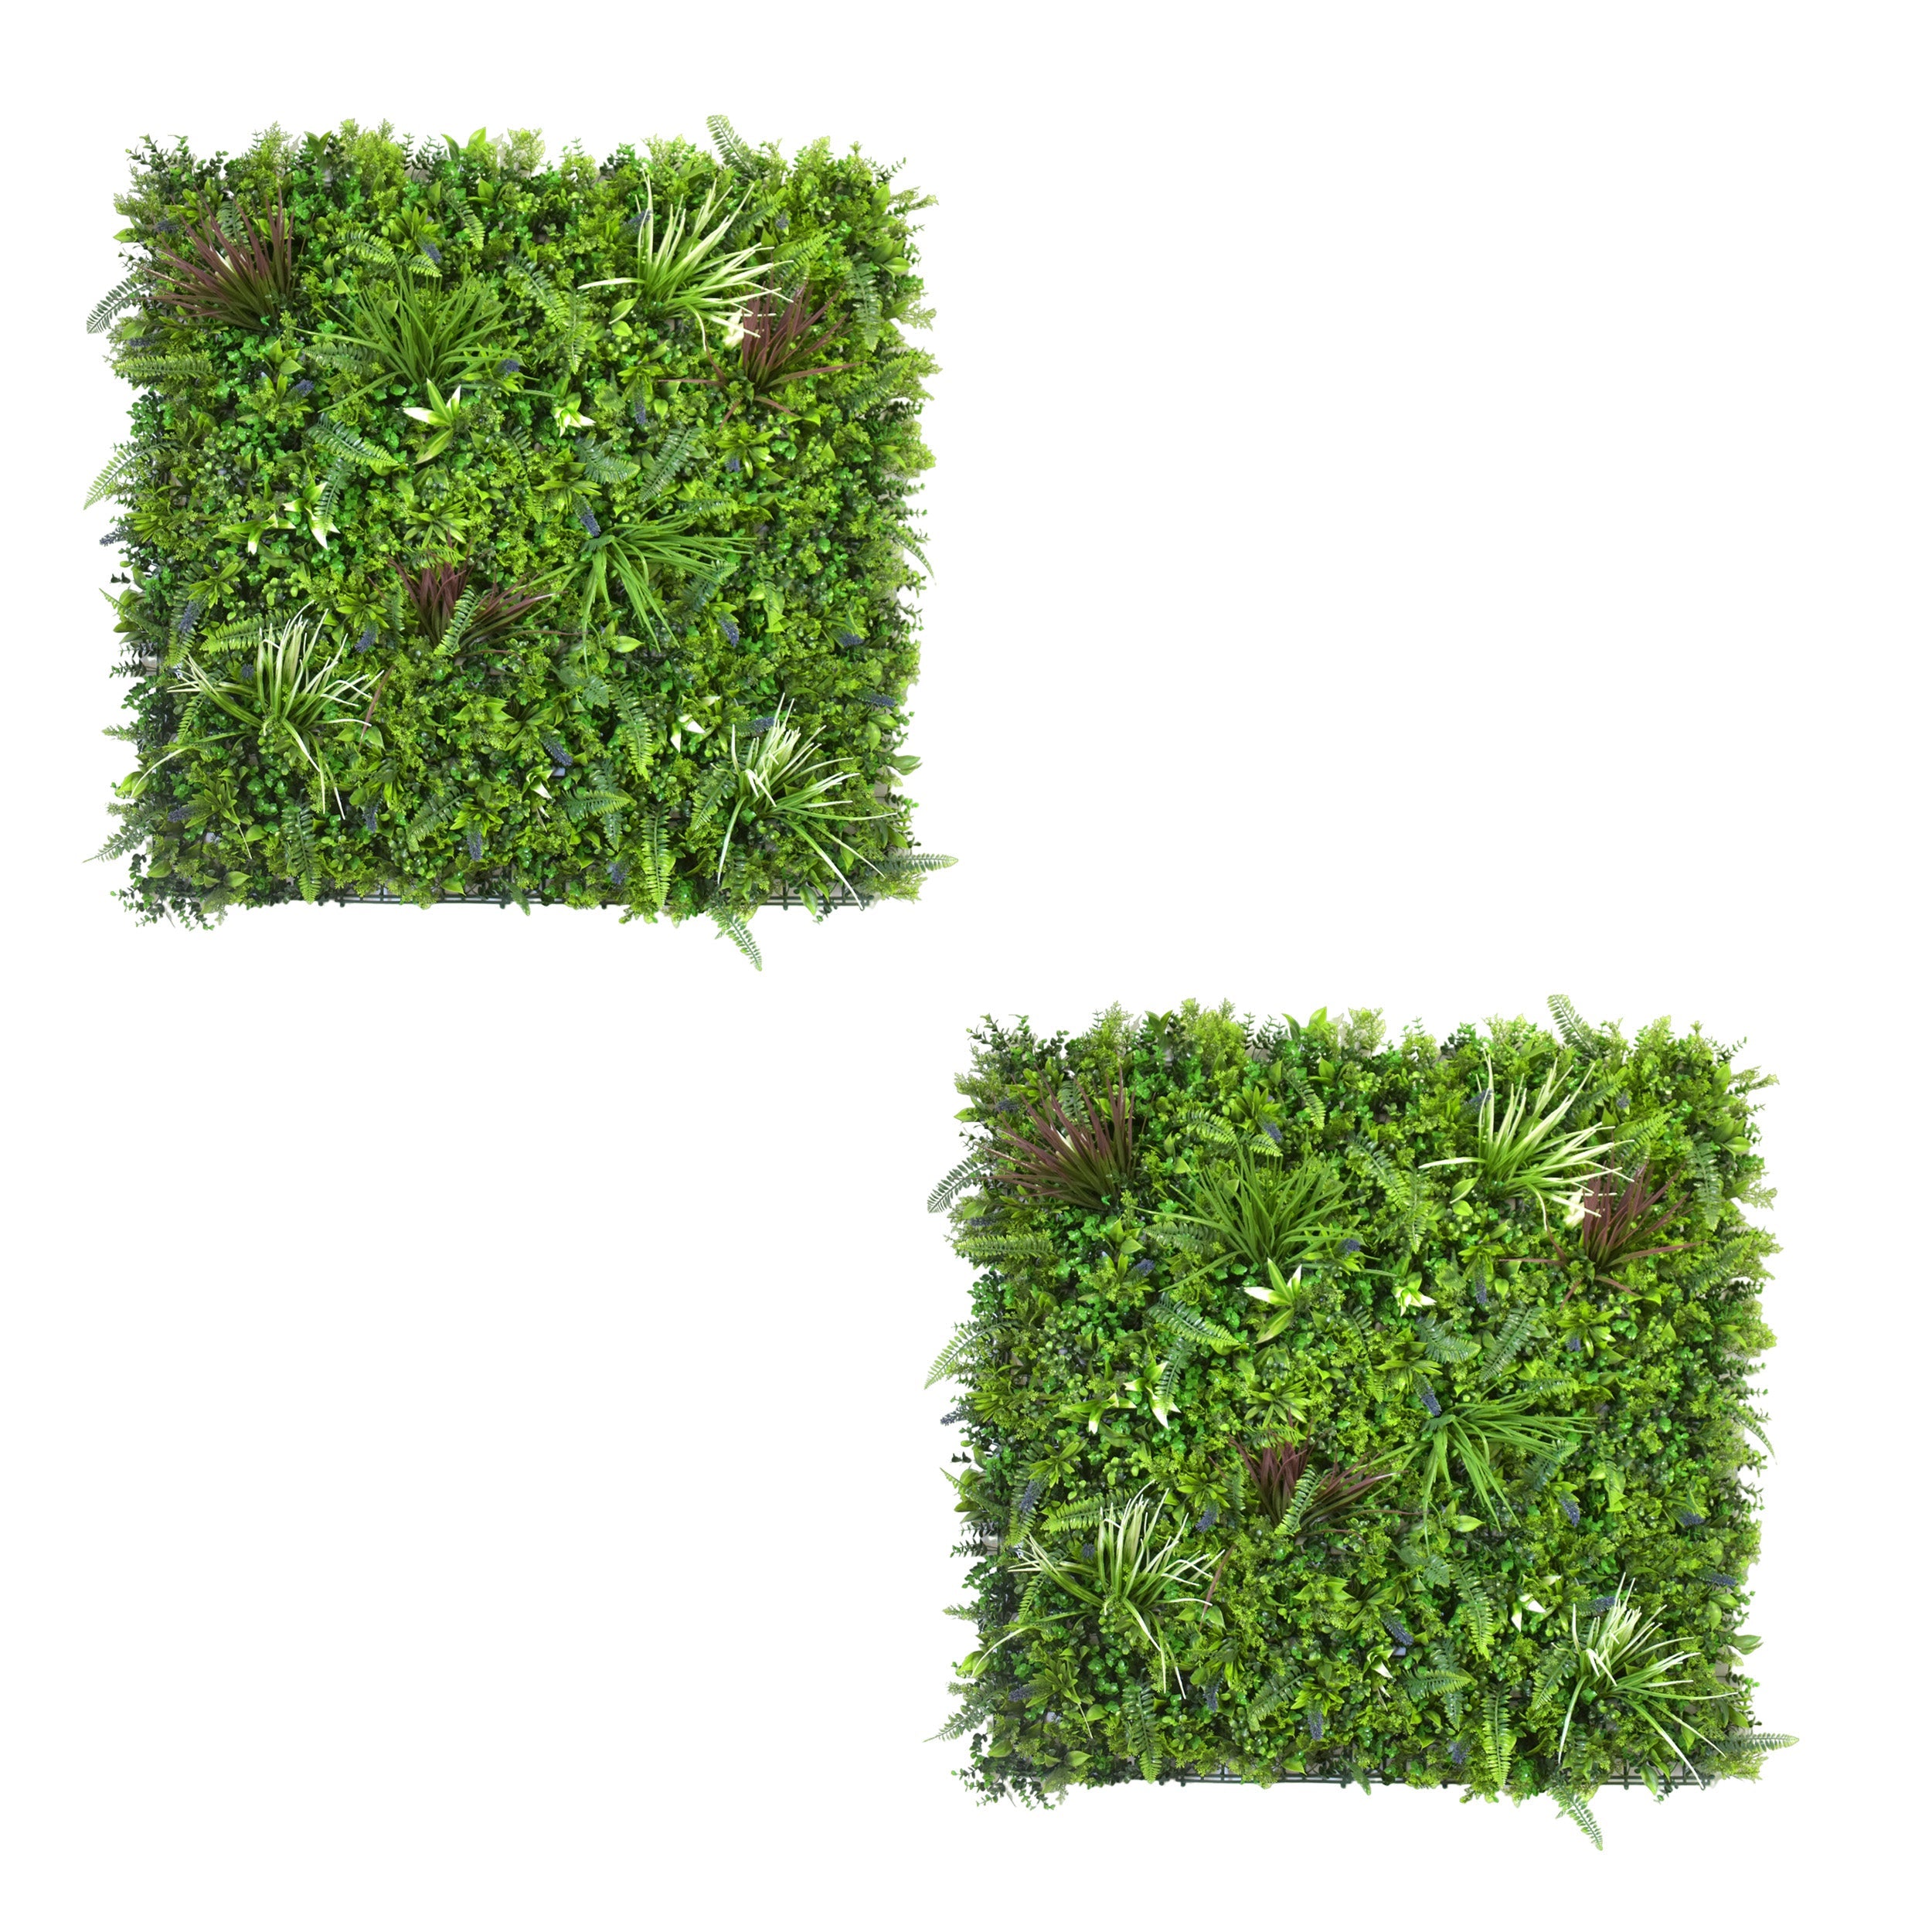 Aavana Greens Artificial Vertical Garden Wall Panel 100X100 CM For Home & Office Decoration 100% UV Indoor And Outdoor Use Option 23